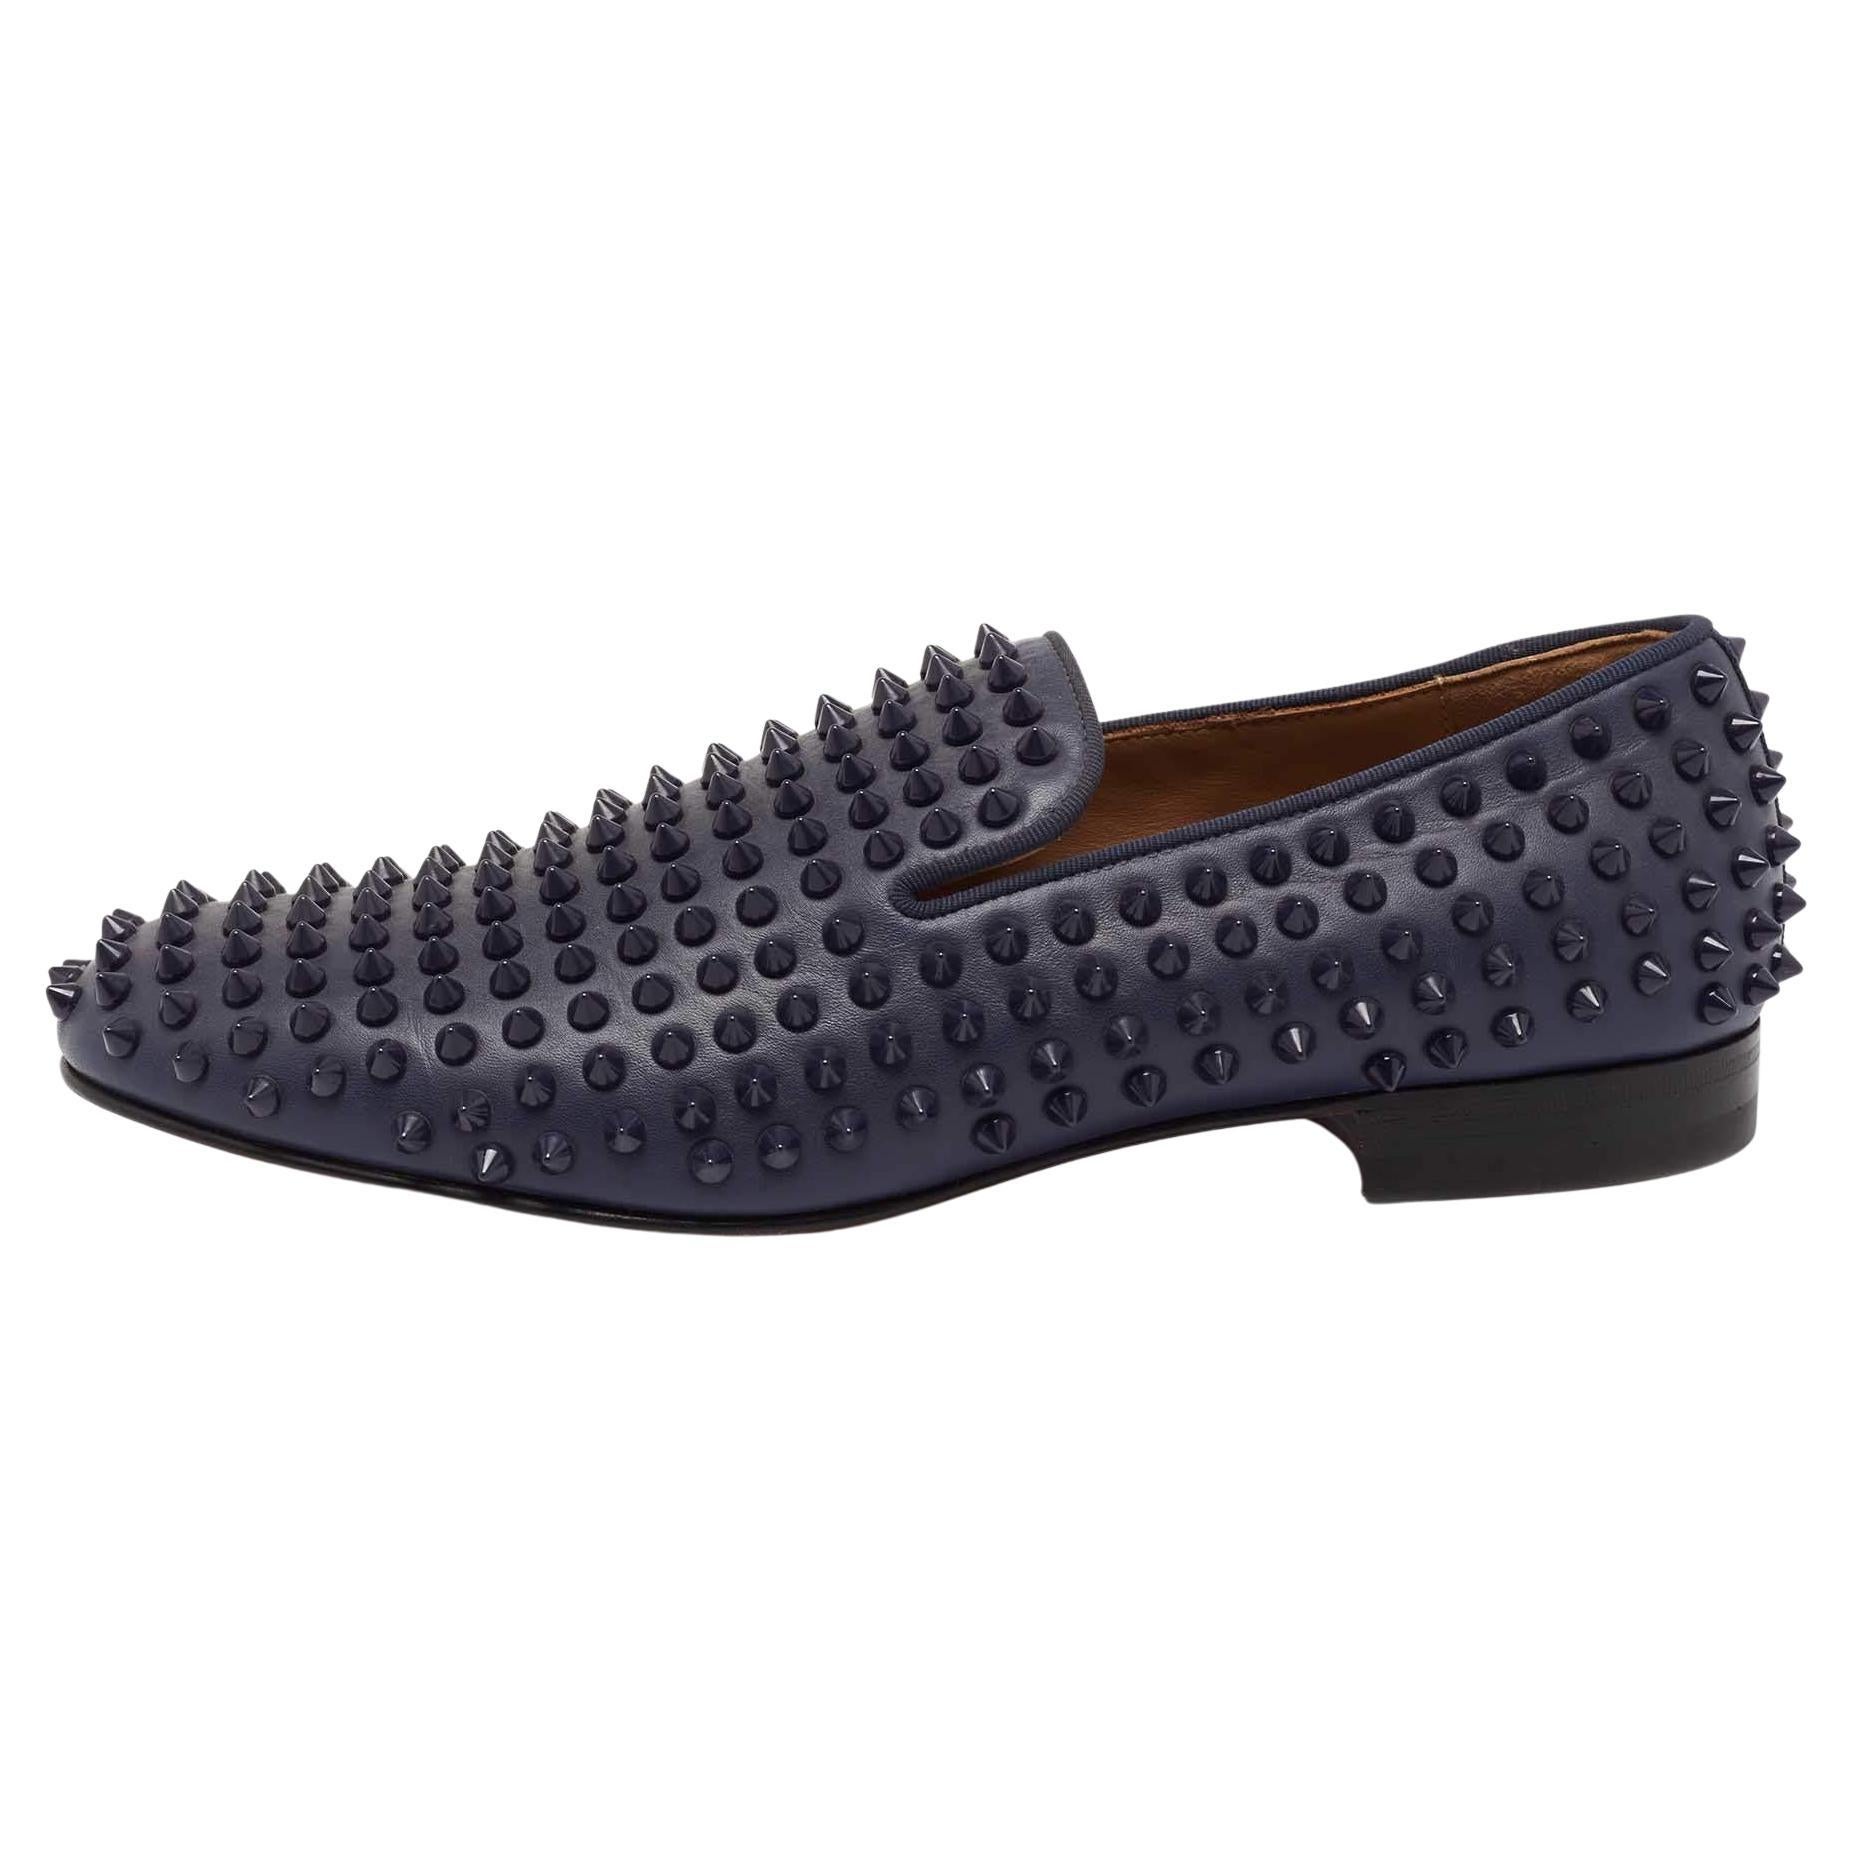 Christian Louboutin Navy Blue Leather Dandelion Spike Smoking Slippers Size 40 For Sale